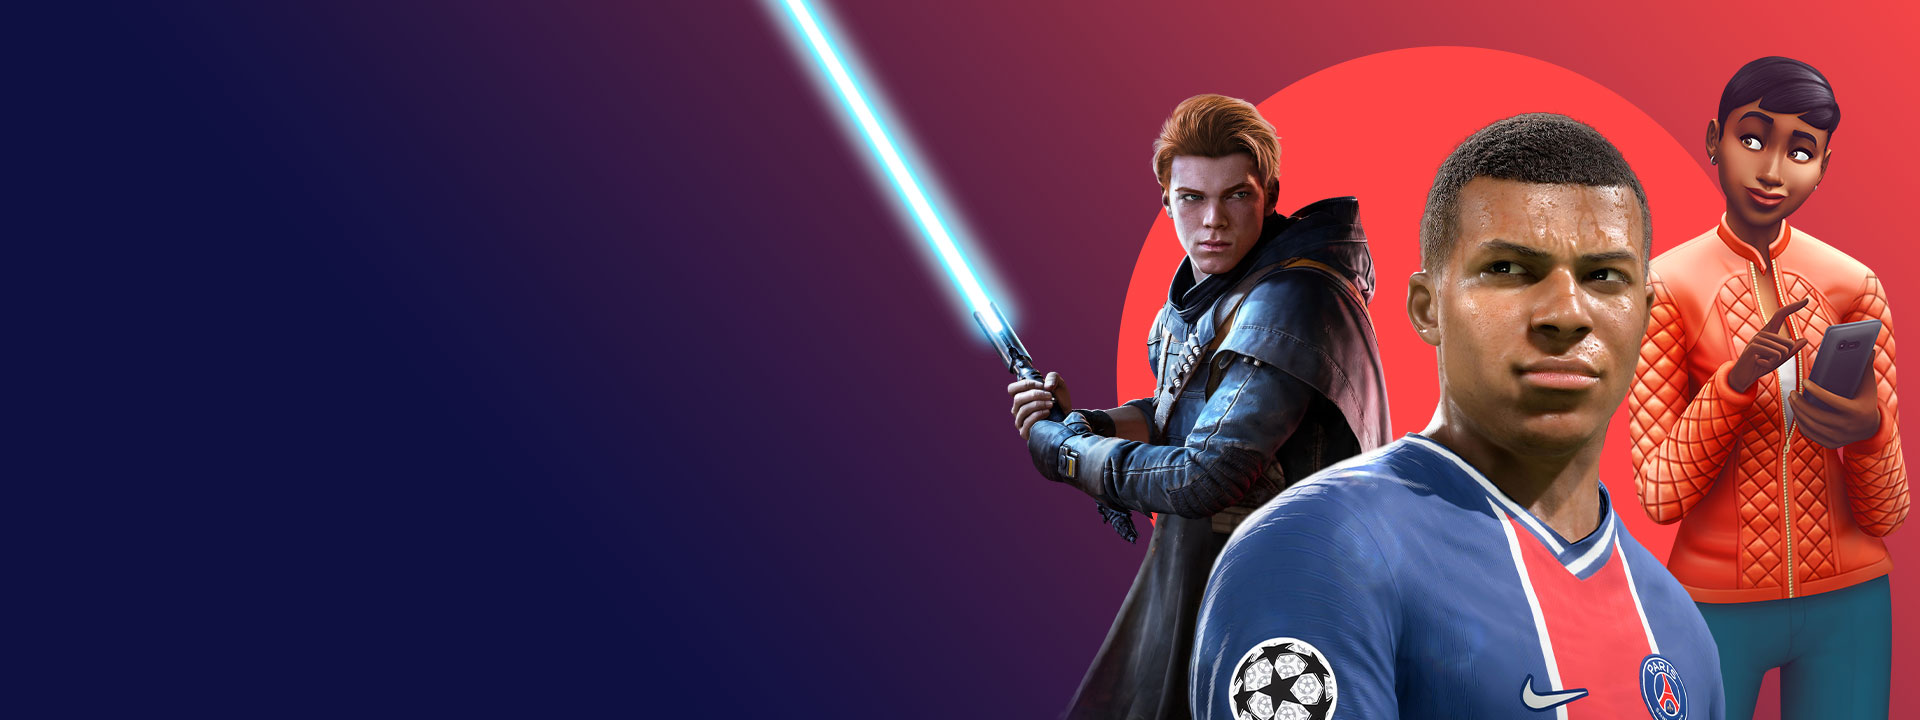 Artwork from EA games included with Xbox Game Pass, including Star Wars Jedi: Fallen Order, FIFA 22, and The Sims 4.